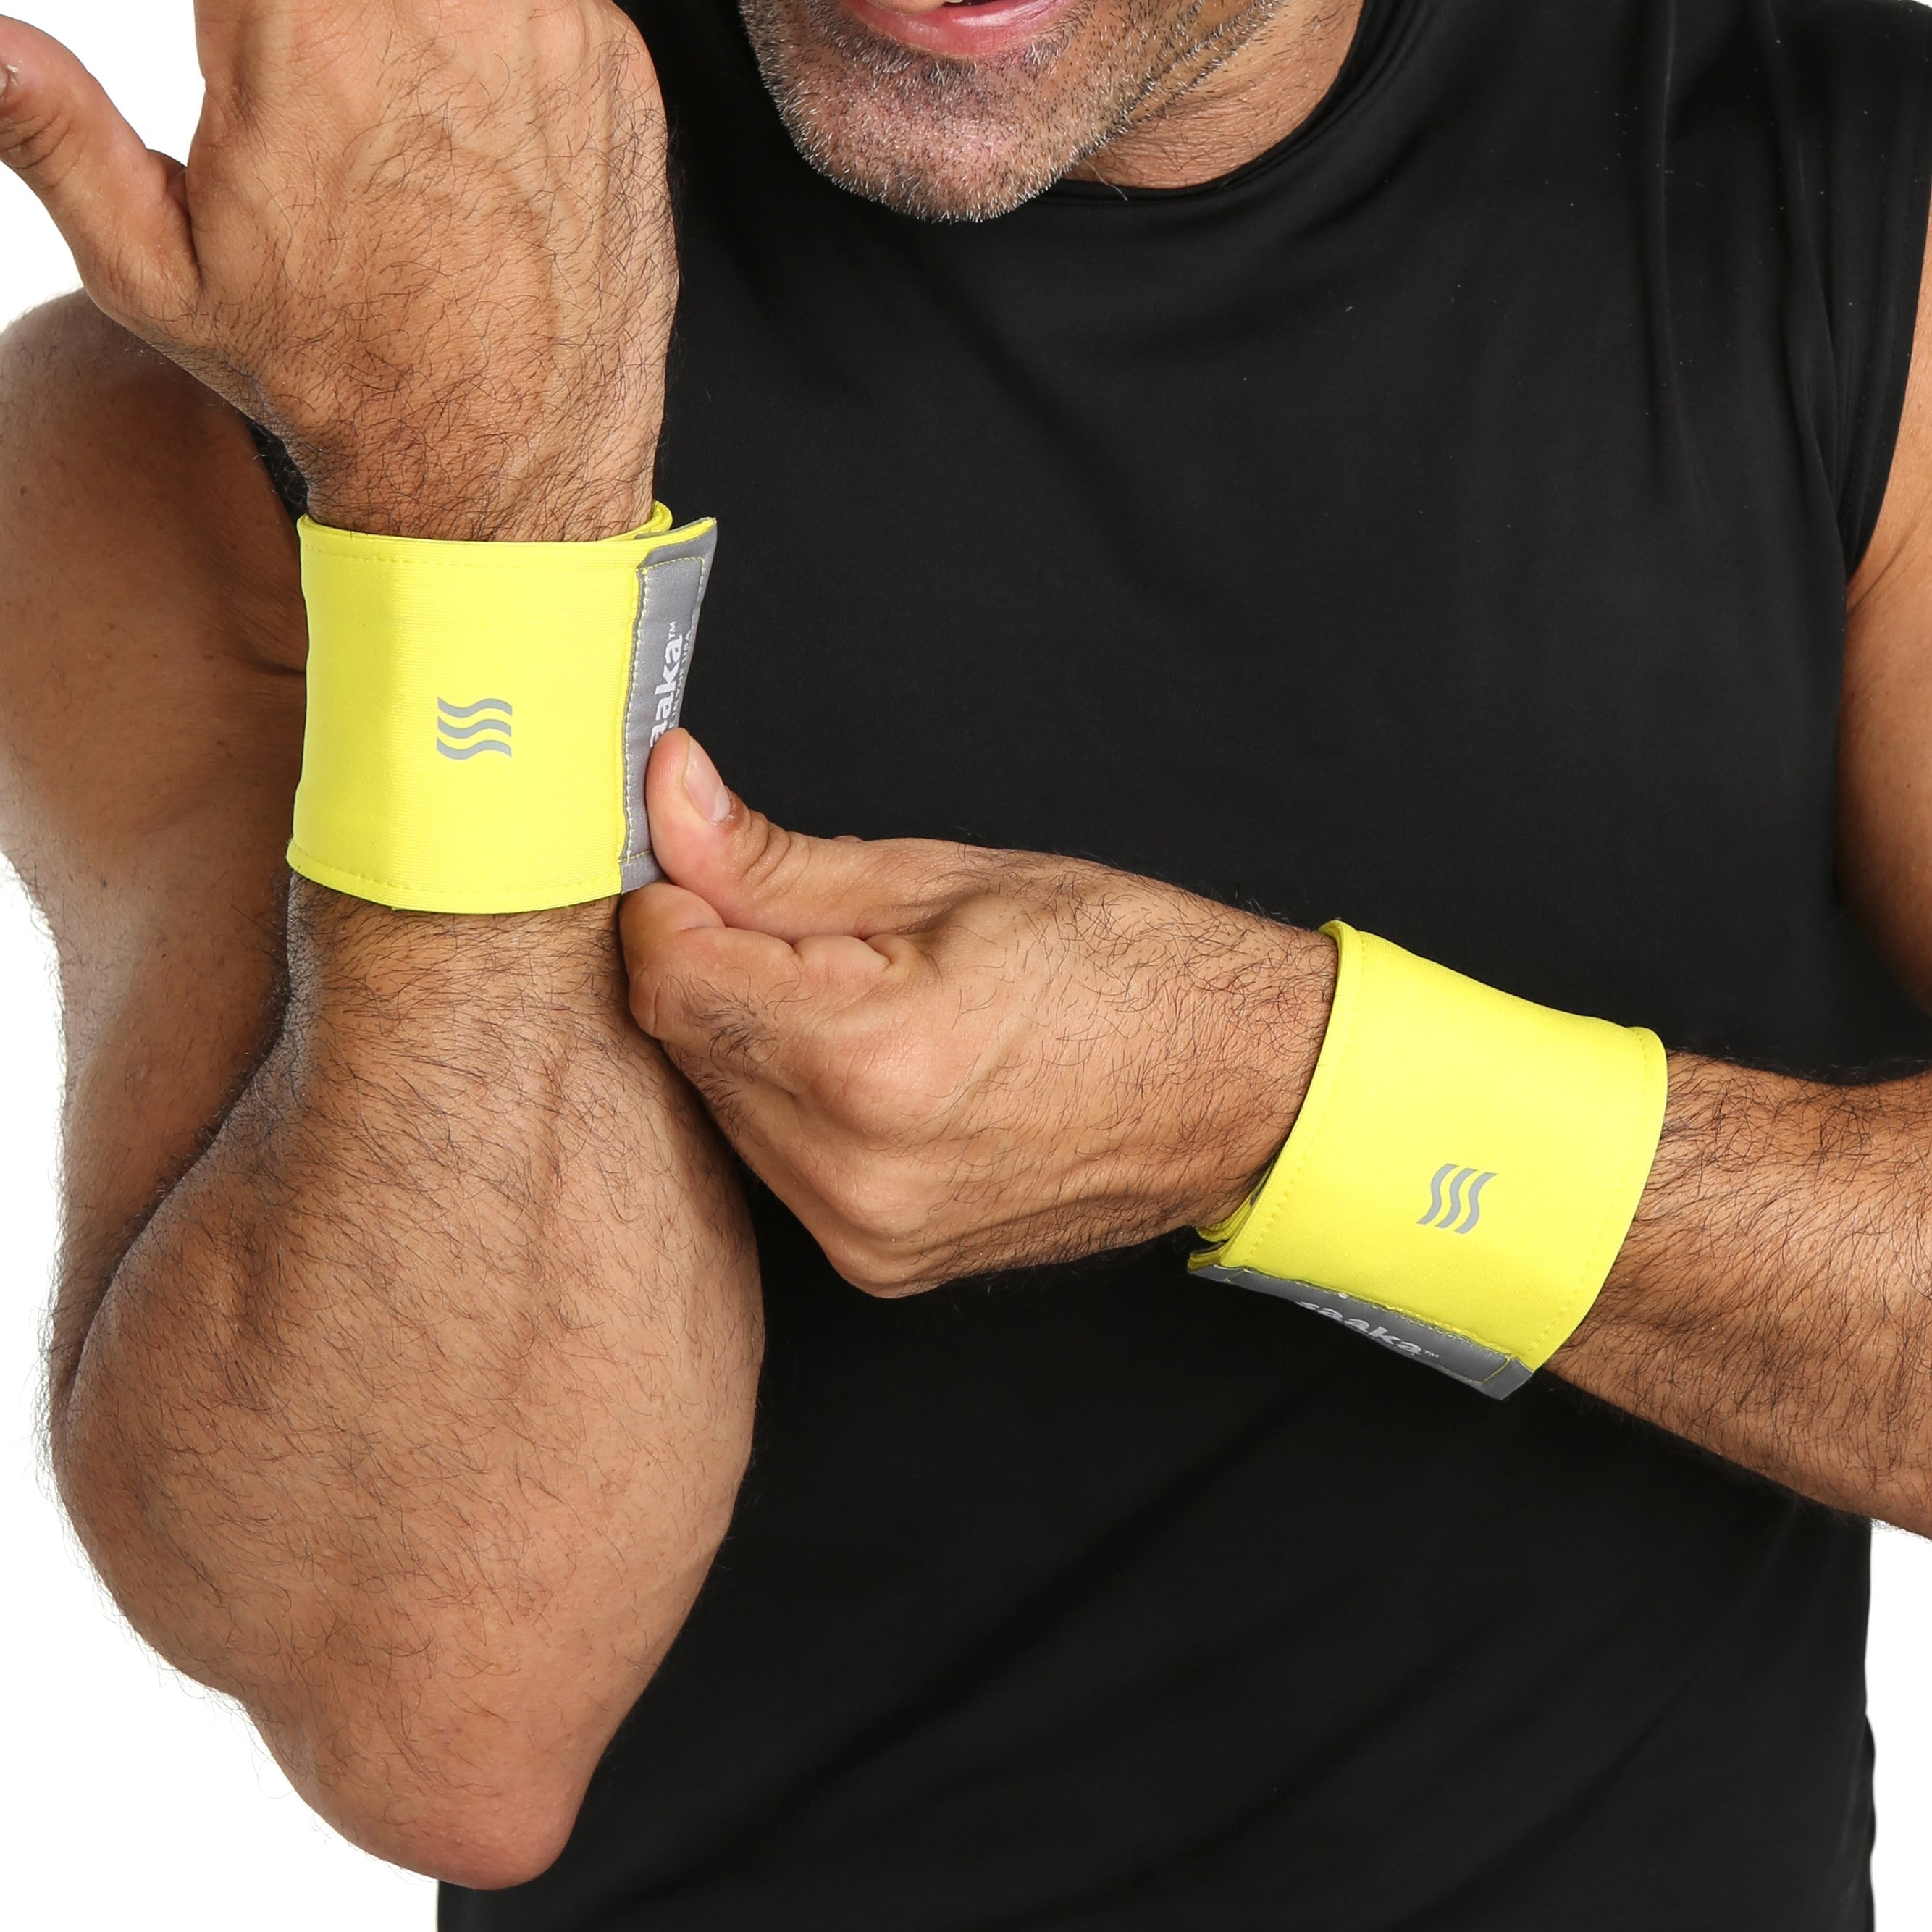 Man wearing yellow wristbands for sweat.